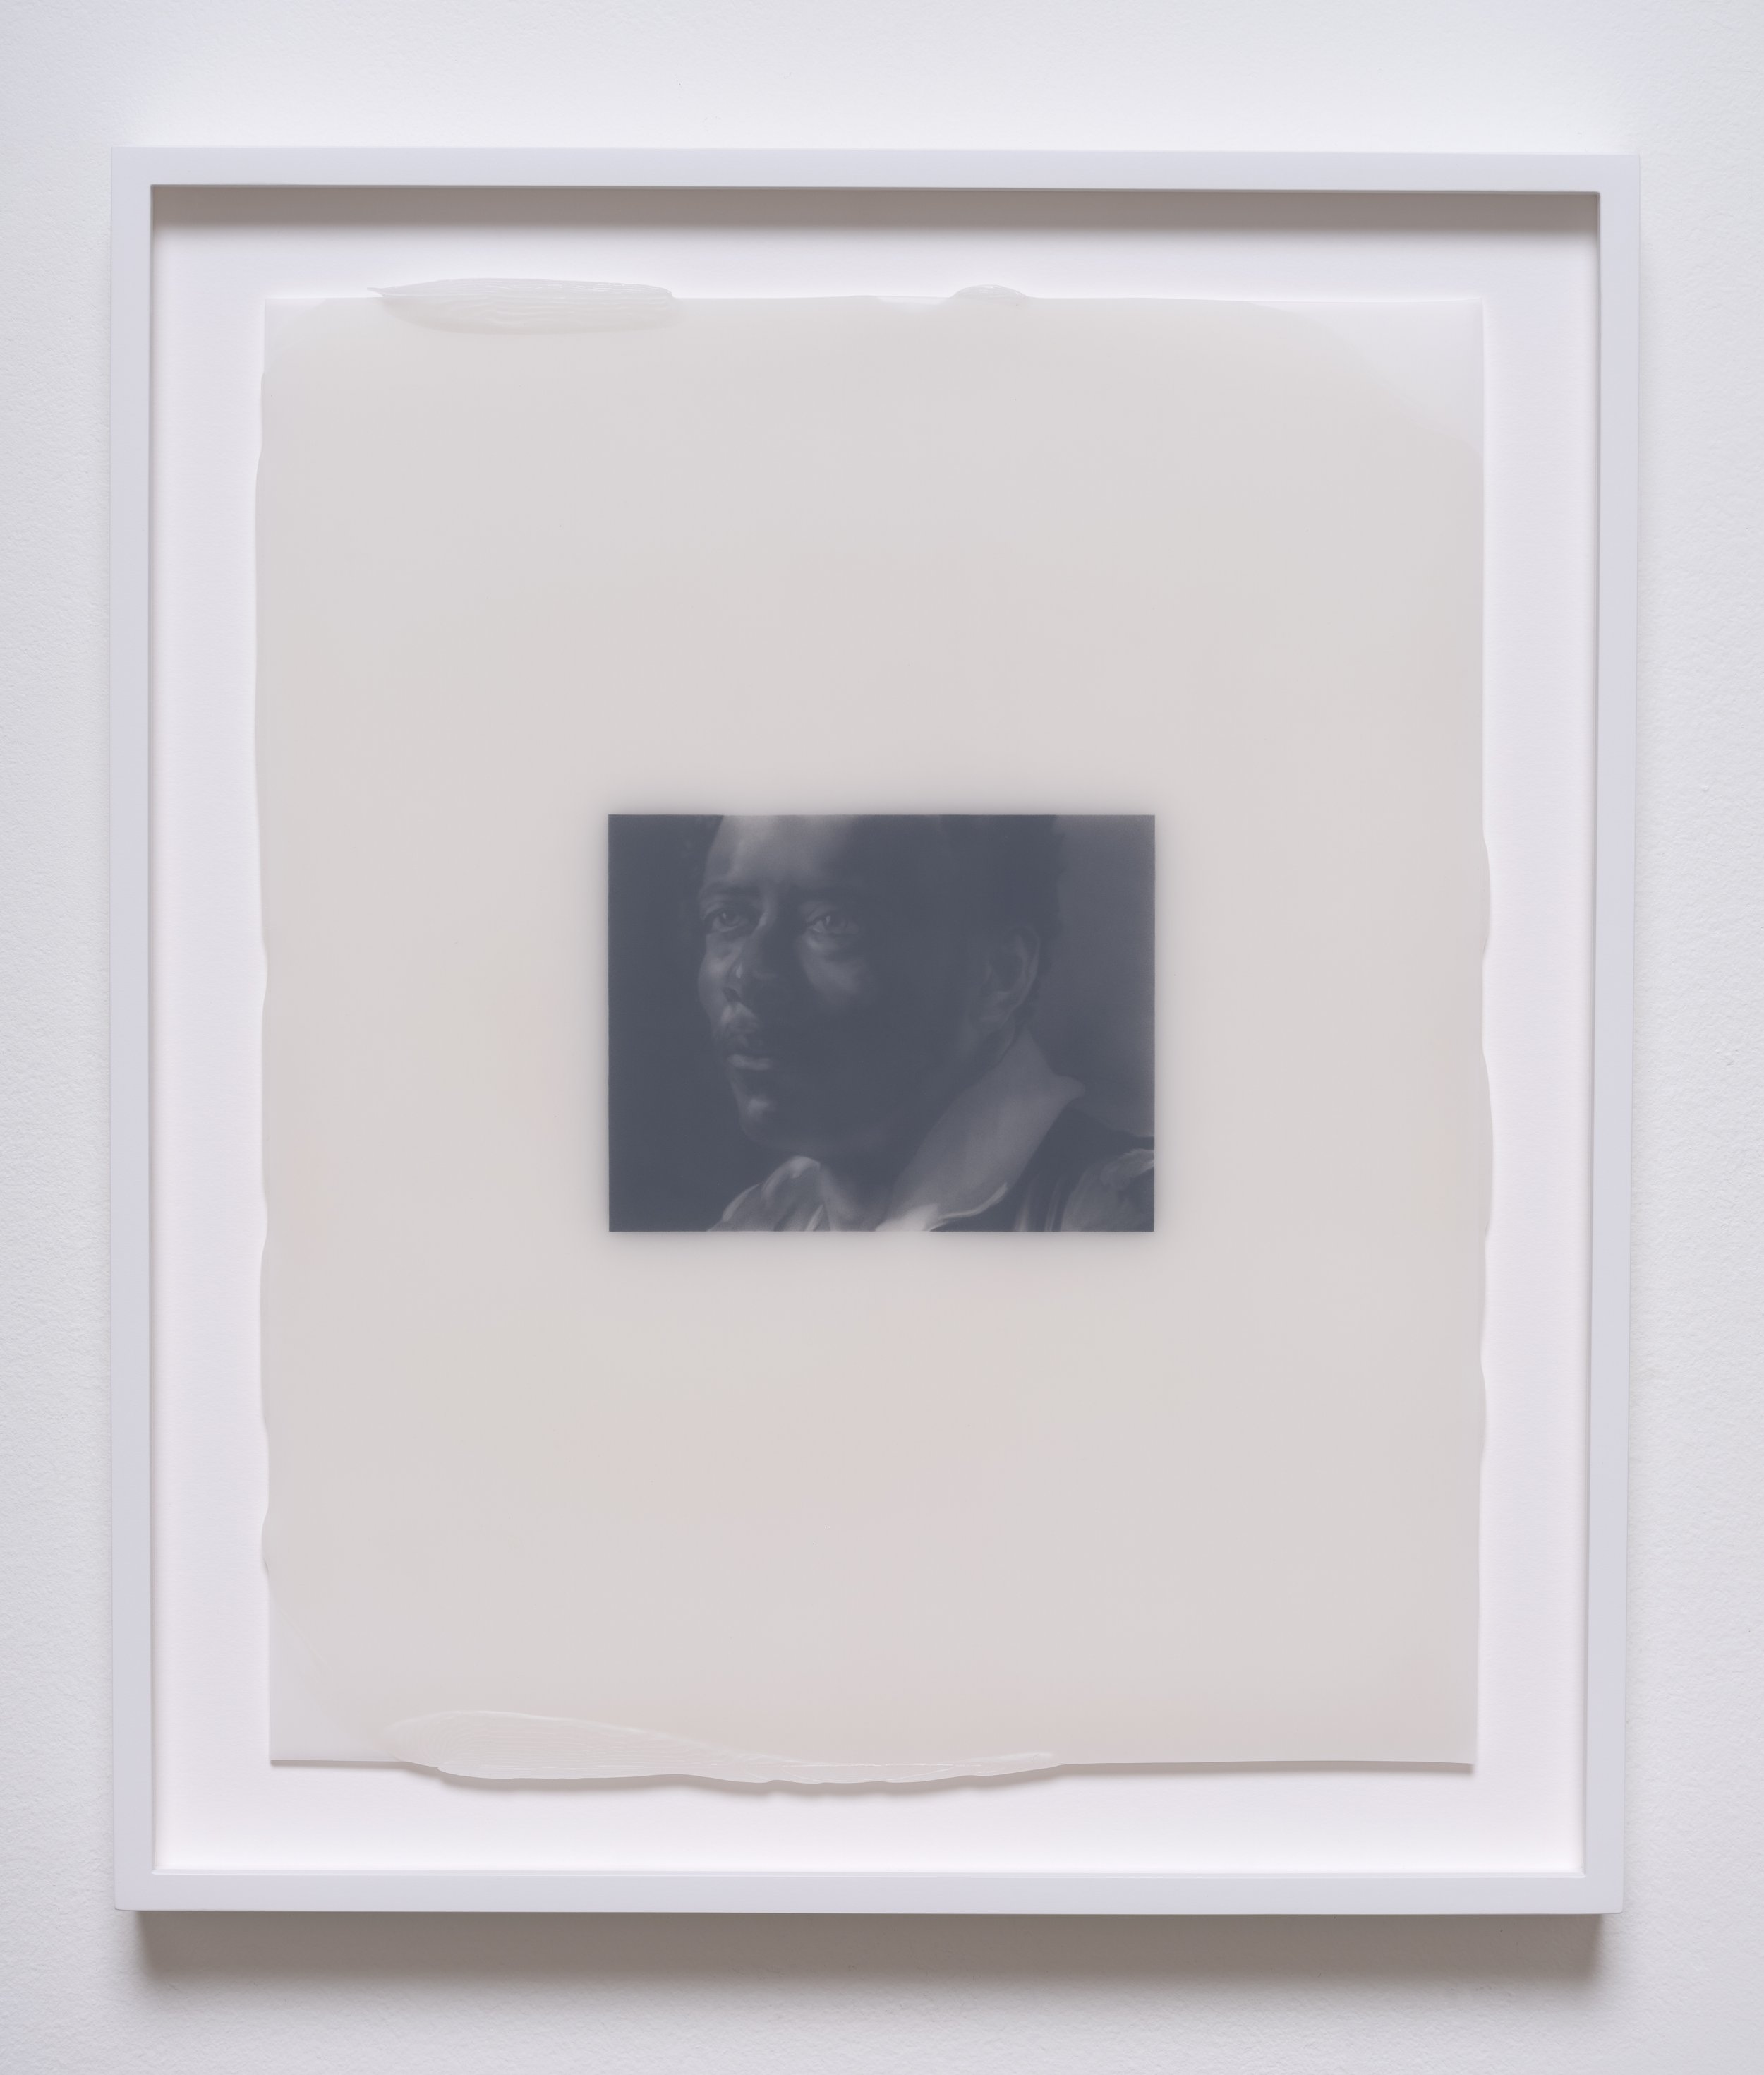   TG.1818.260.2023 , 2023 Graphite, wax, and drafting film 17 1/2 x 15 x 1 1/2 inches (framed)&nbsp; 